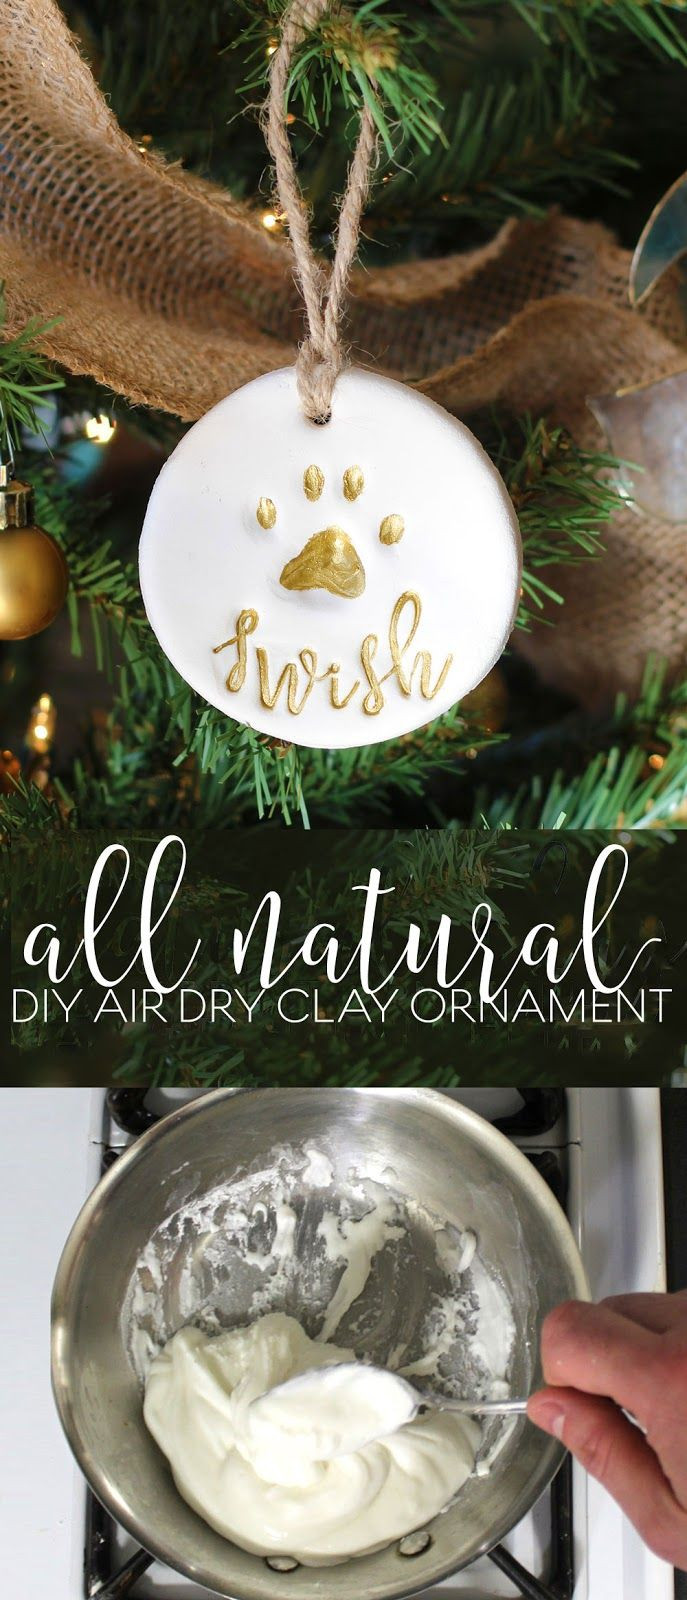 DIY Dog Paw Print Ornament
 Pet t basket with personalized all natural DIY air dry